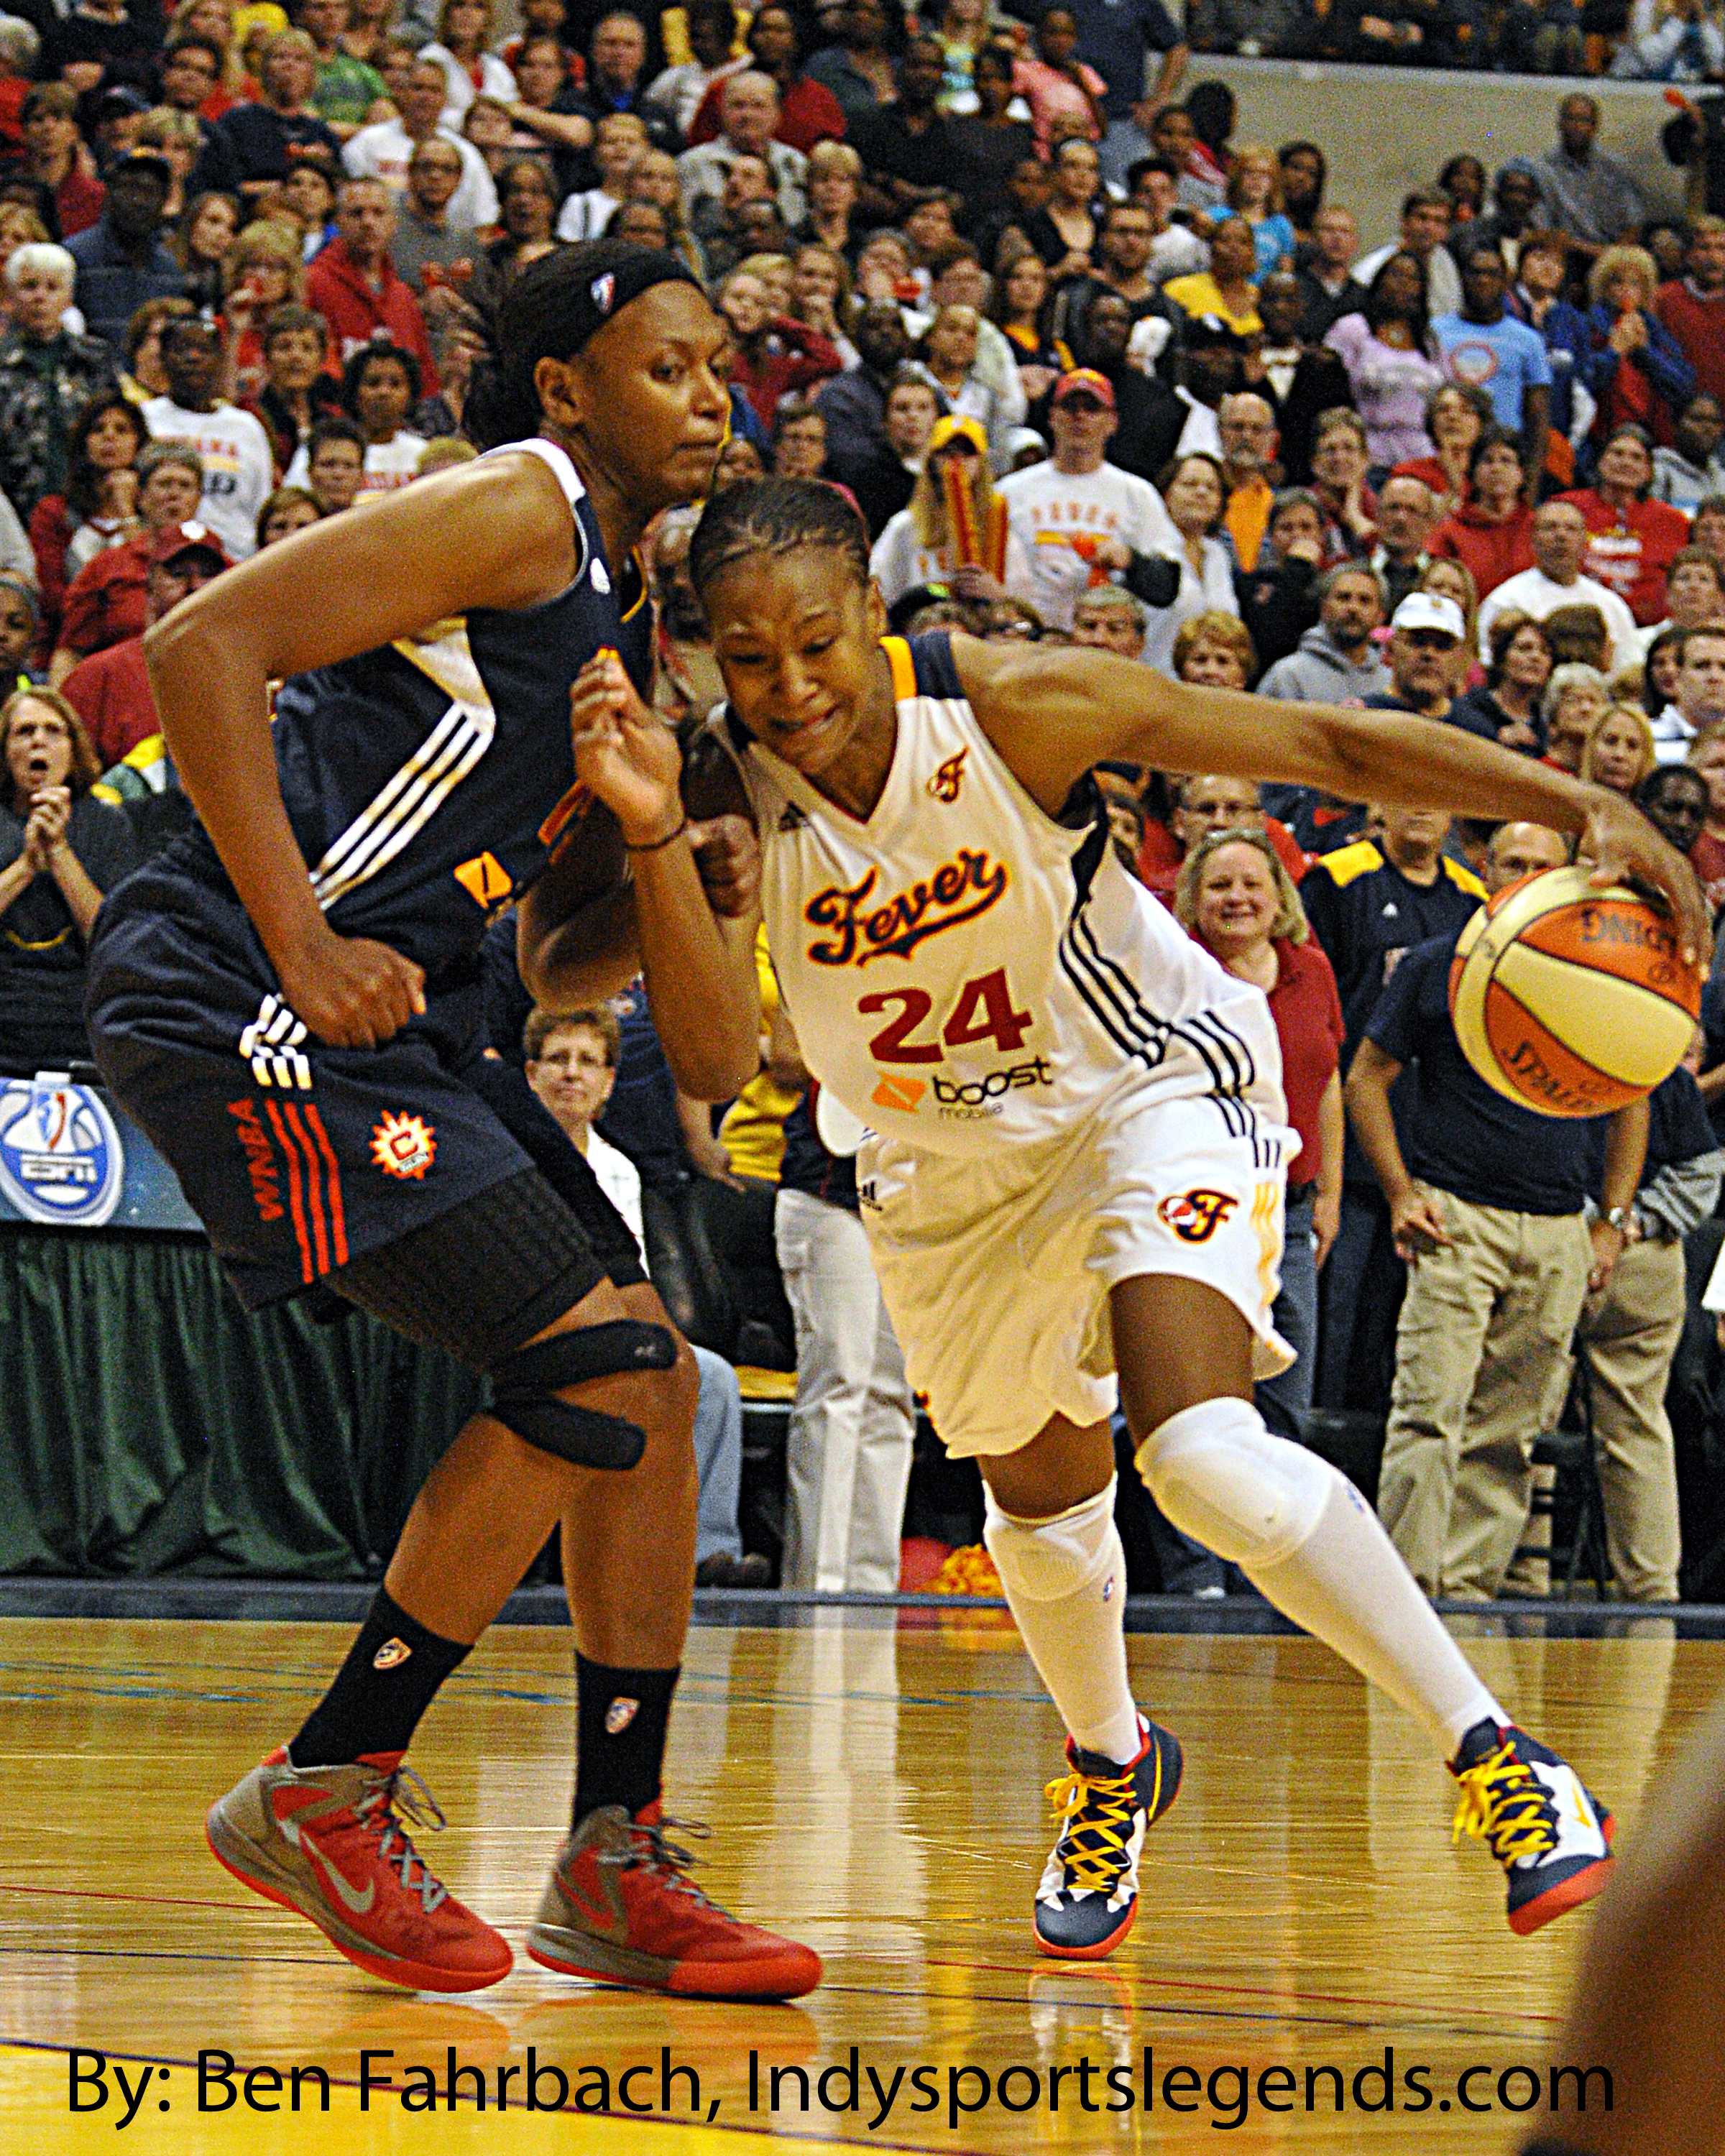 Fever F Tamika Catchings wins record 20th Player of the Week award